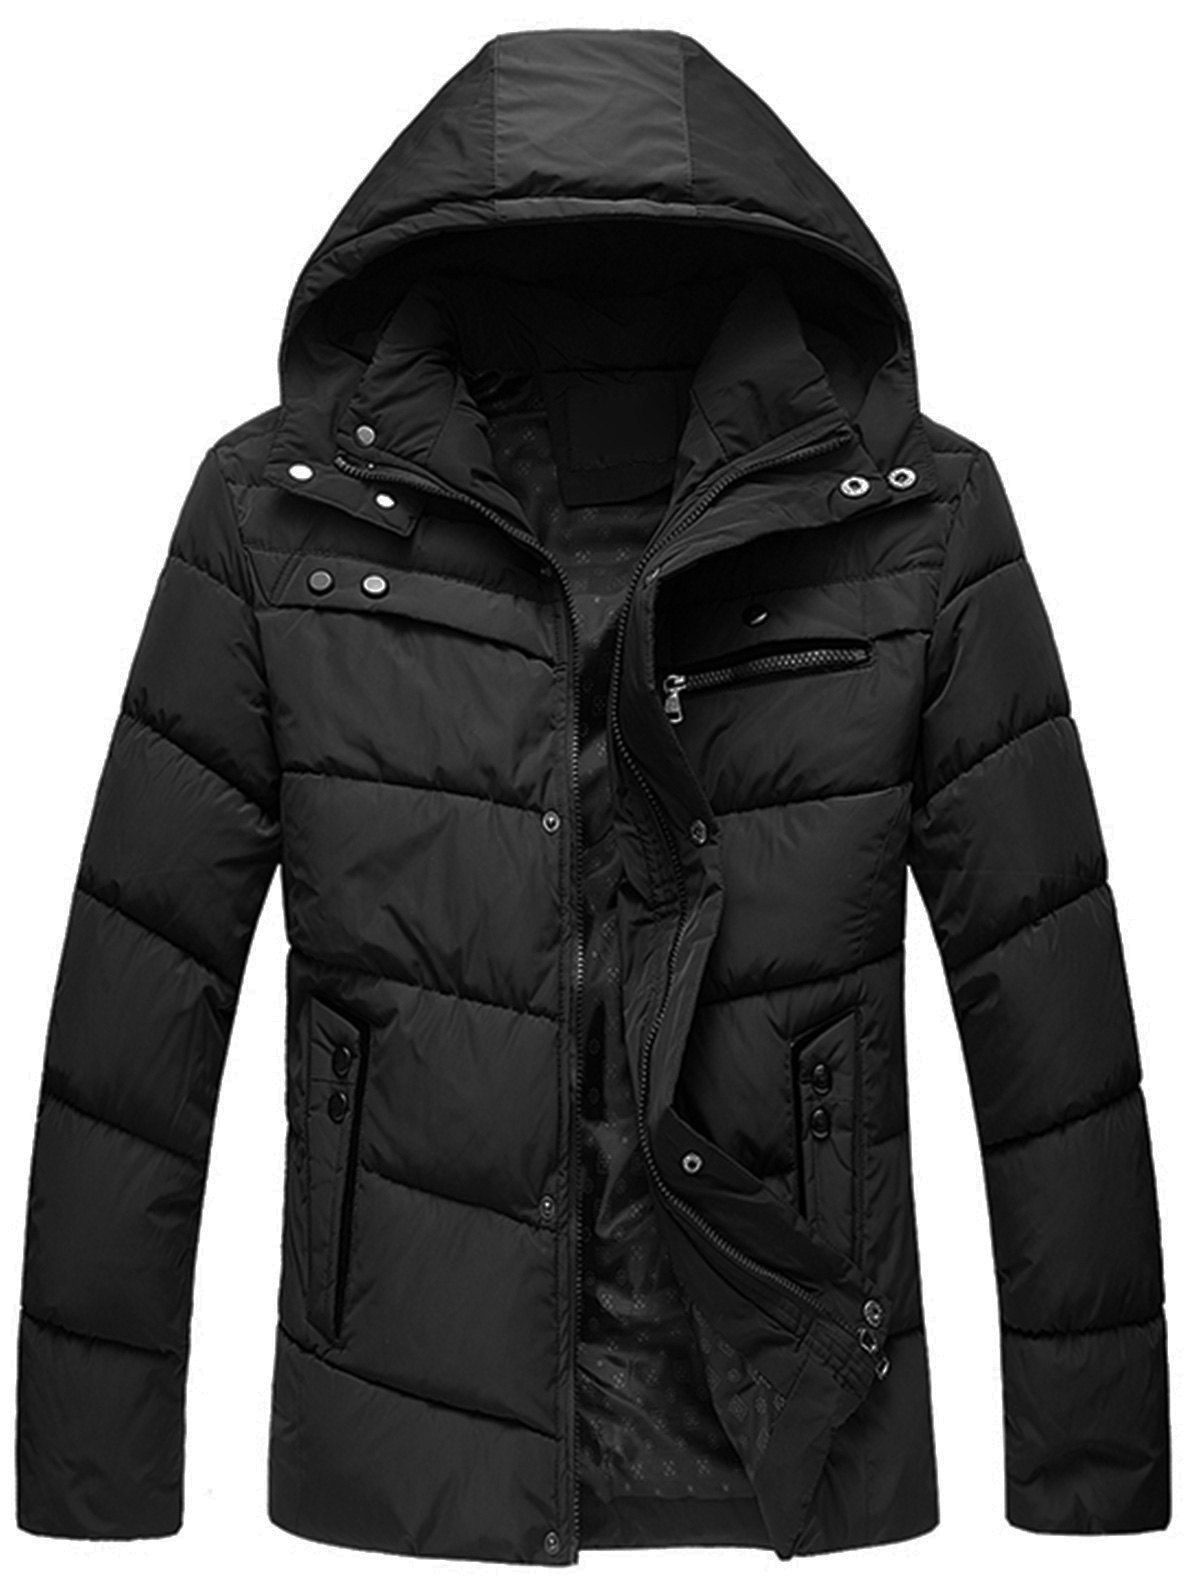 [58% OFF] Zip Up With Snap Button Closure Puffer Jacket | Rosegal